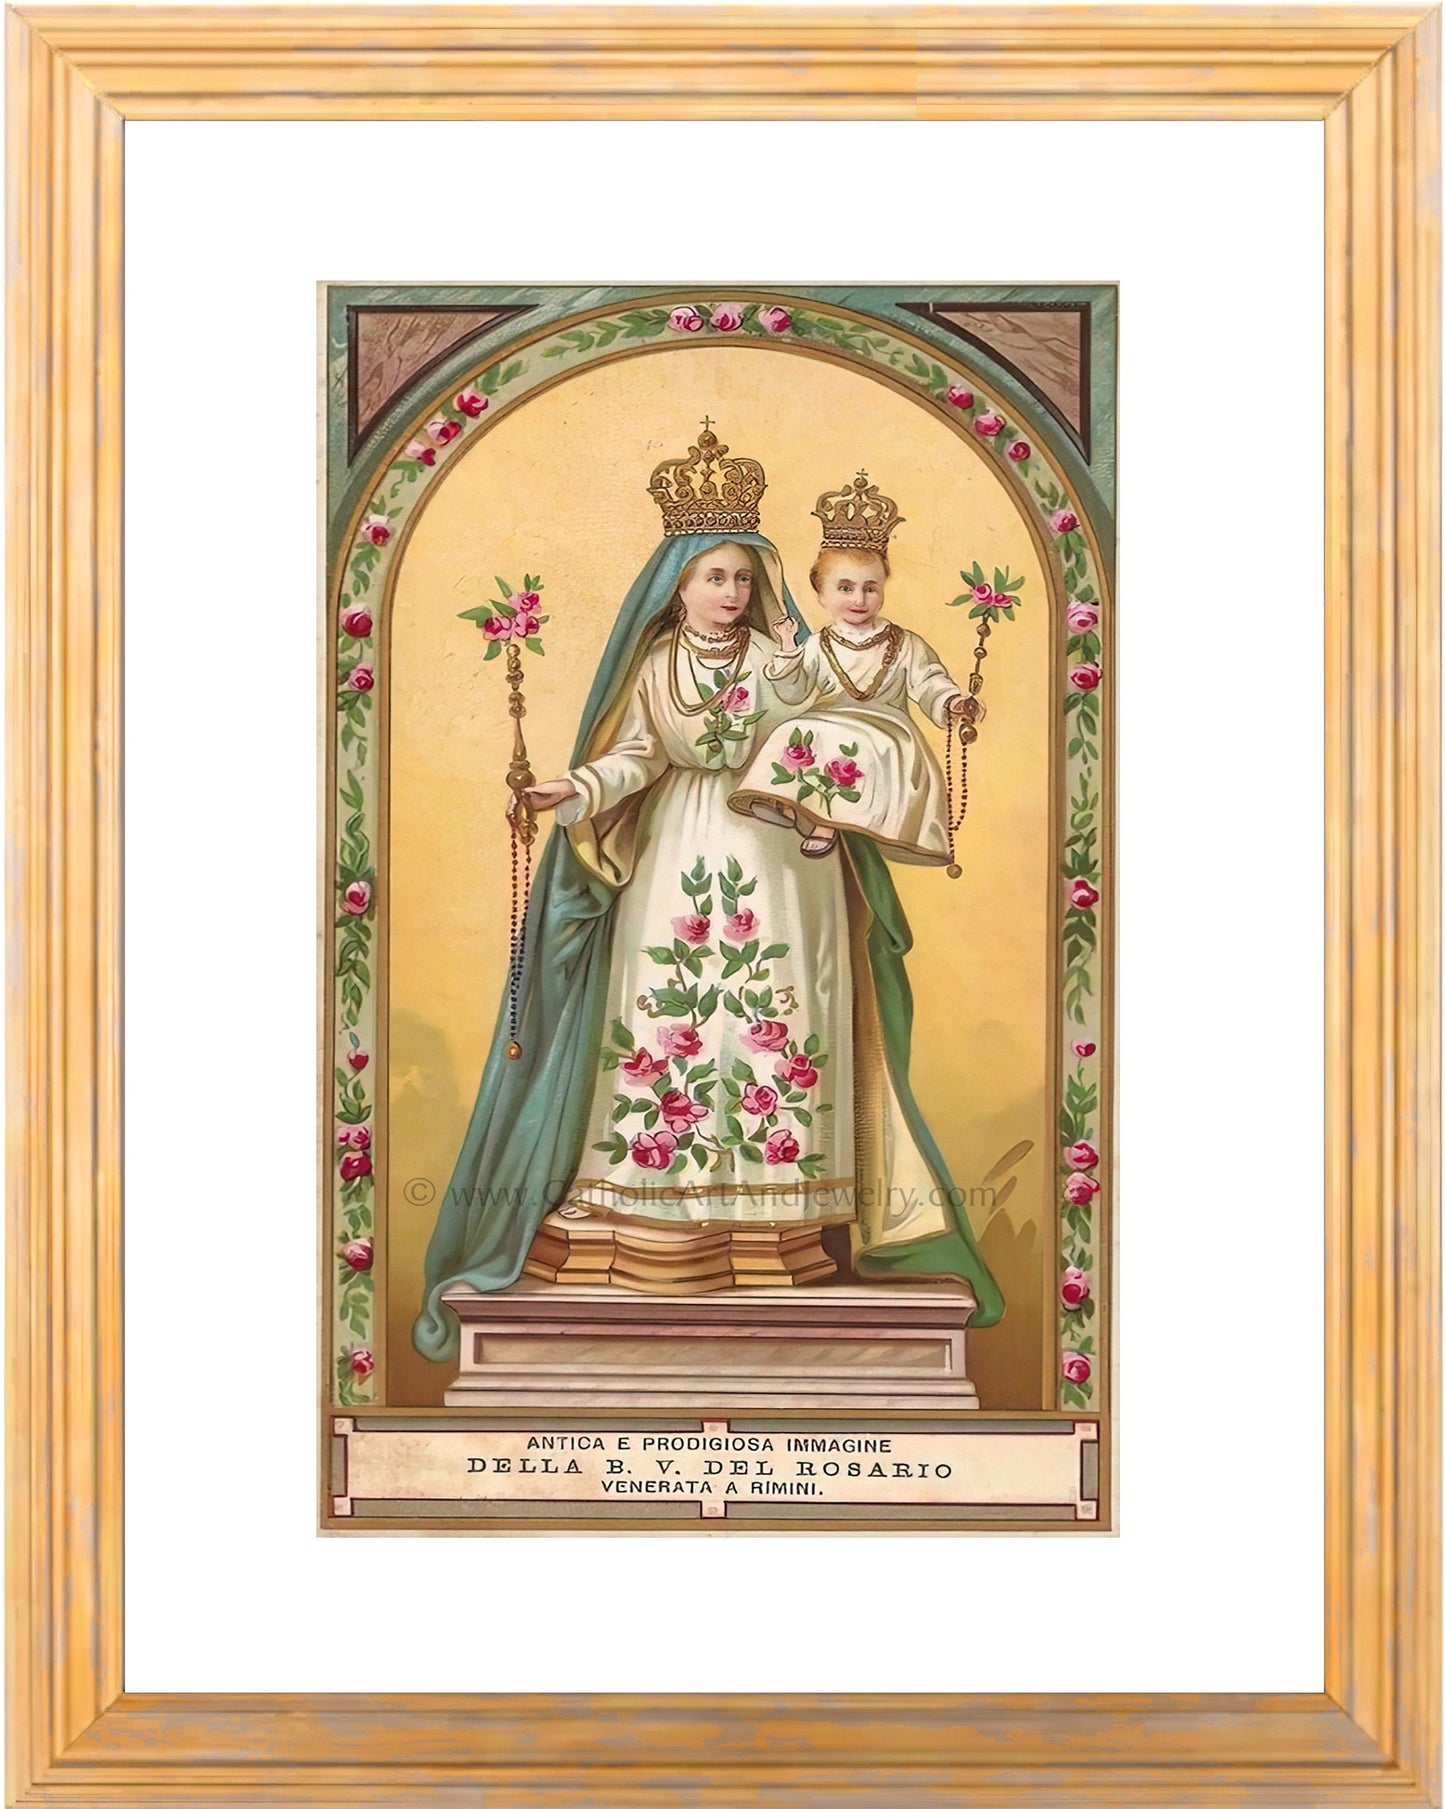 Our Lady of the Rosary – based on a Vintage Italian Holy Card – Catholic Art Print